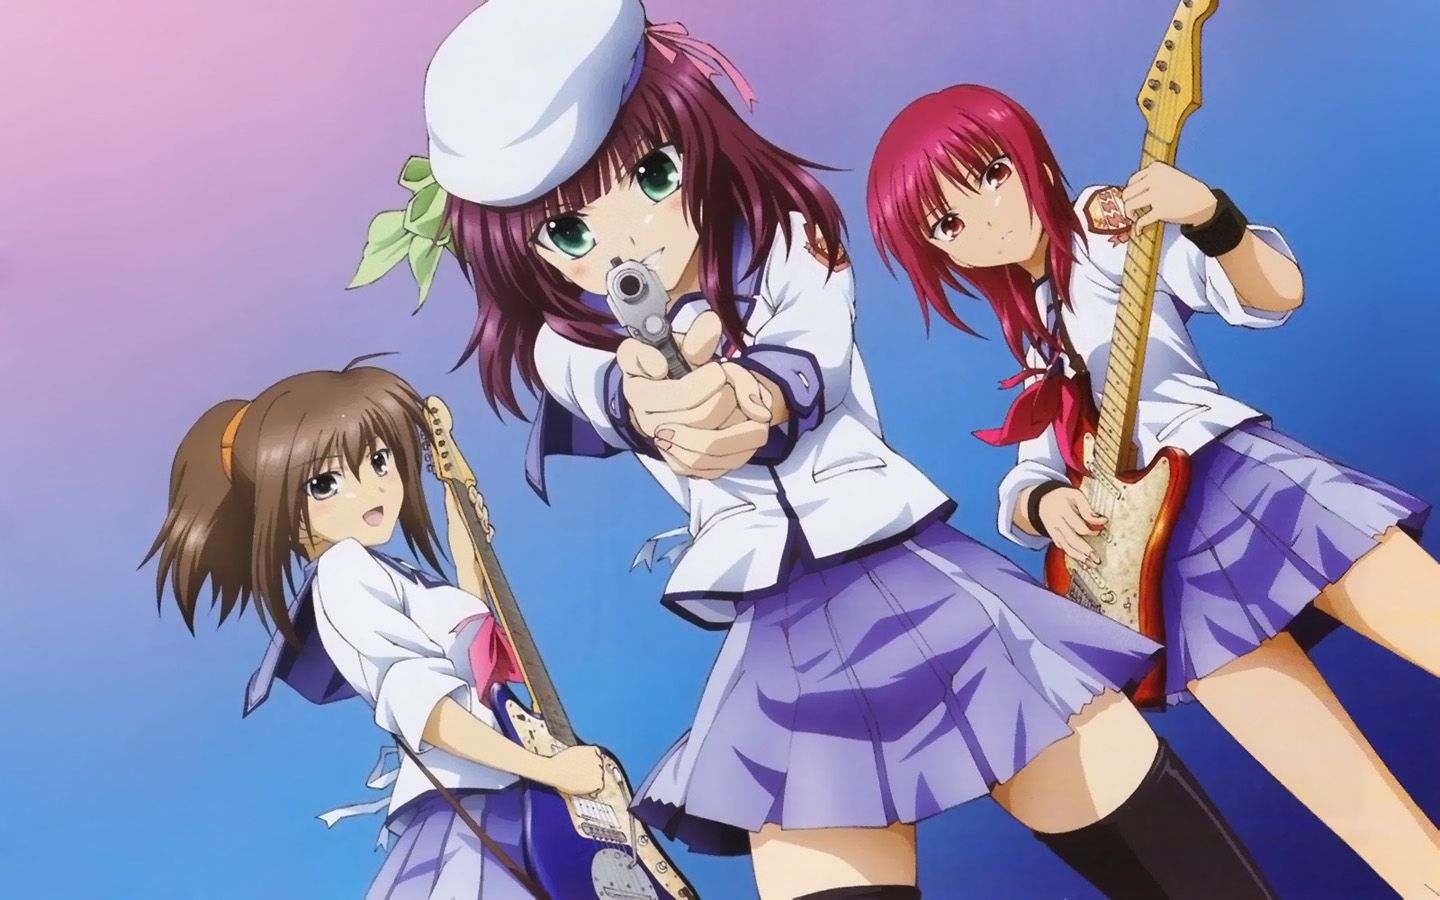 Angel Beats! Picture